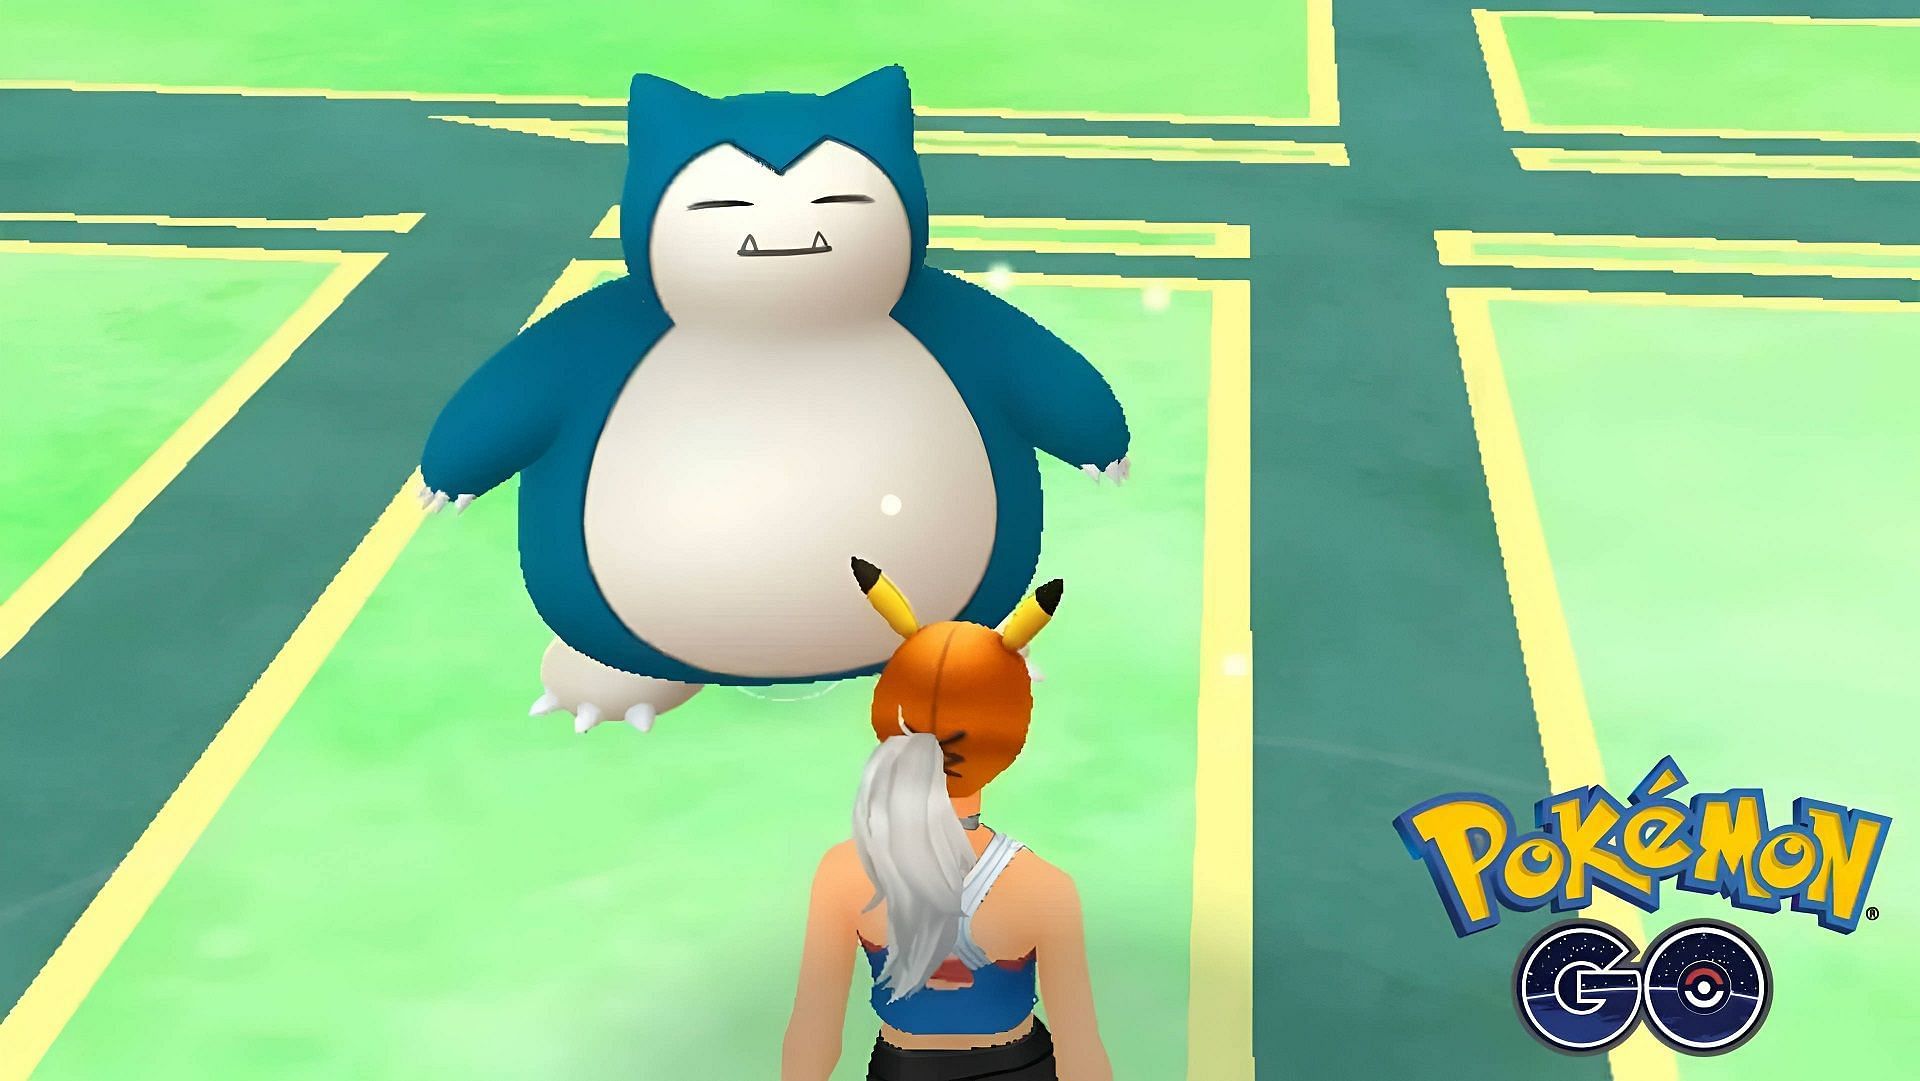 Snorlax appears in many different aspects of Pokemon GO